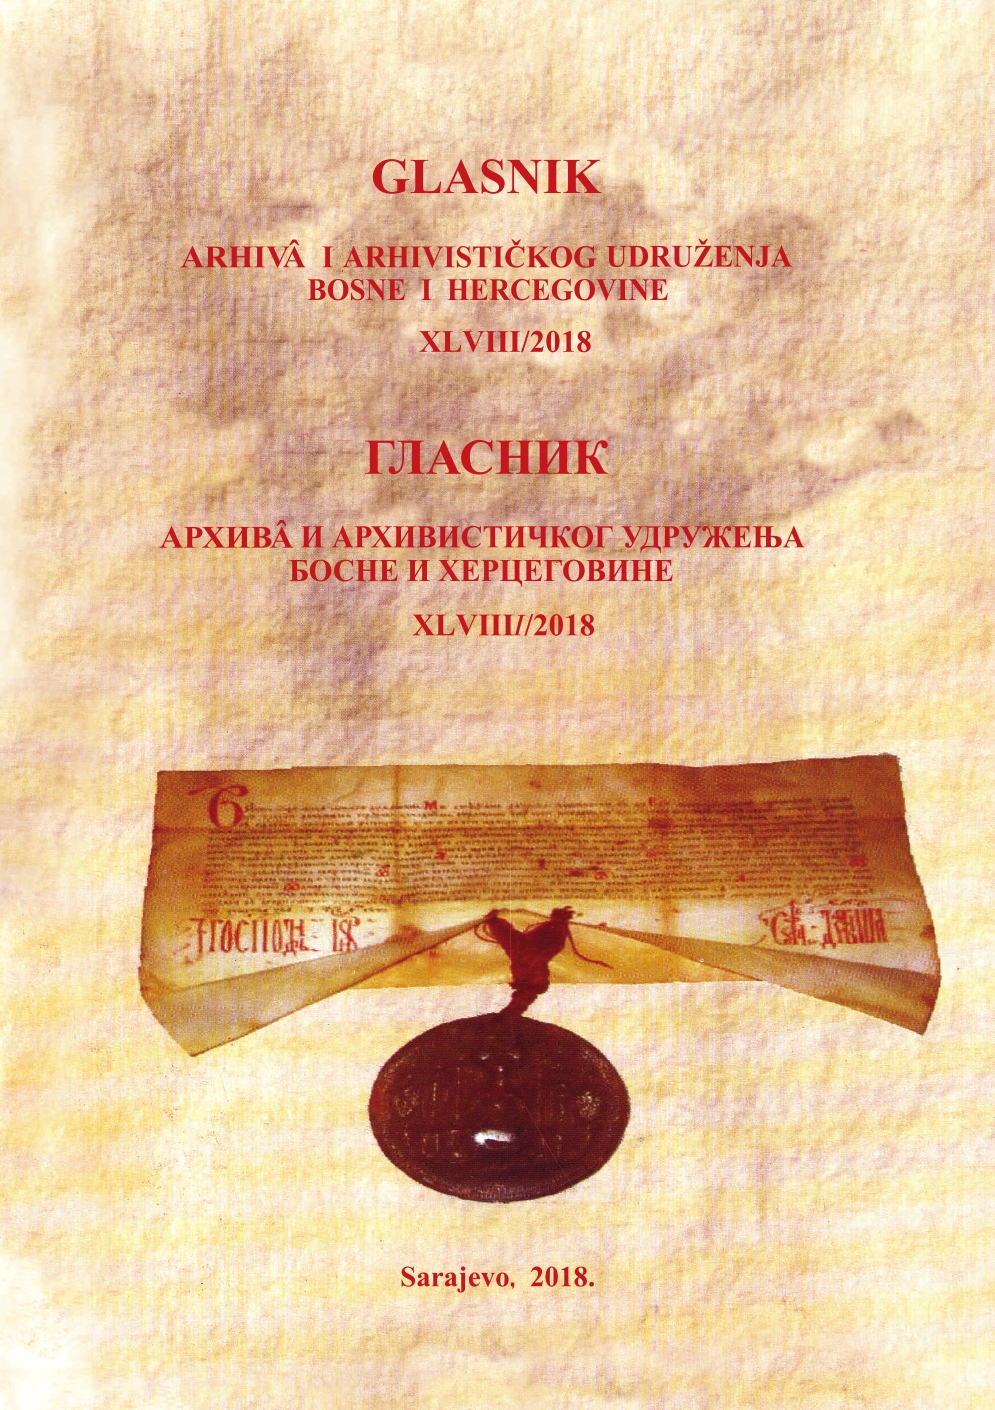 IT EQUIPMENT AND SYSTEMS IN ARCHIVES OF BOSNIA AND HERZEGOVINA WITH FOCUS OF THE ARCHIVES OF TUZLA CANTON  - status and requirements -